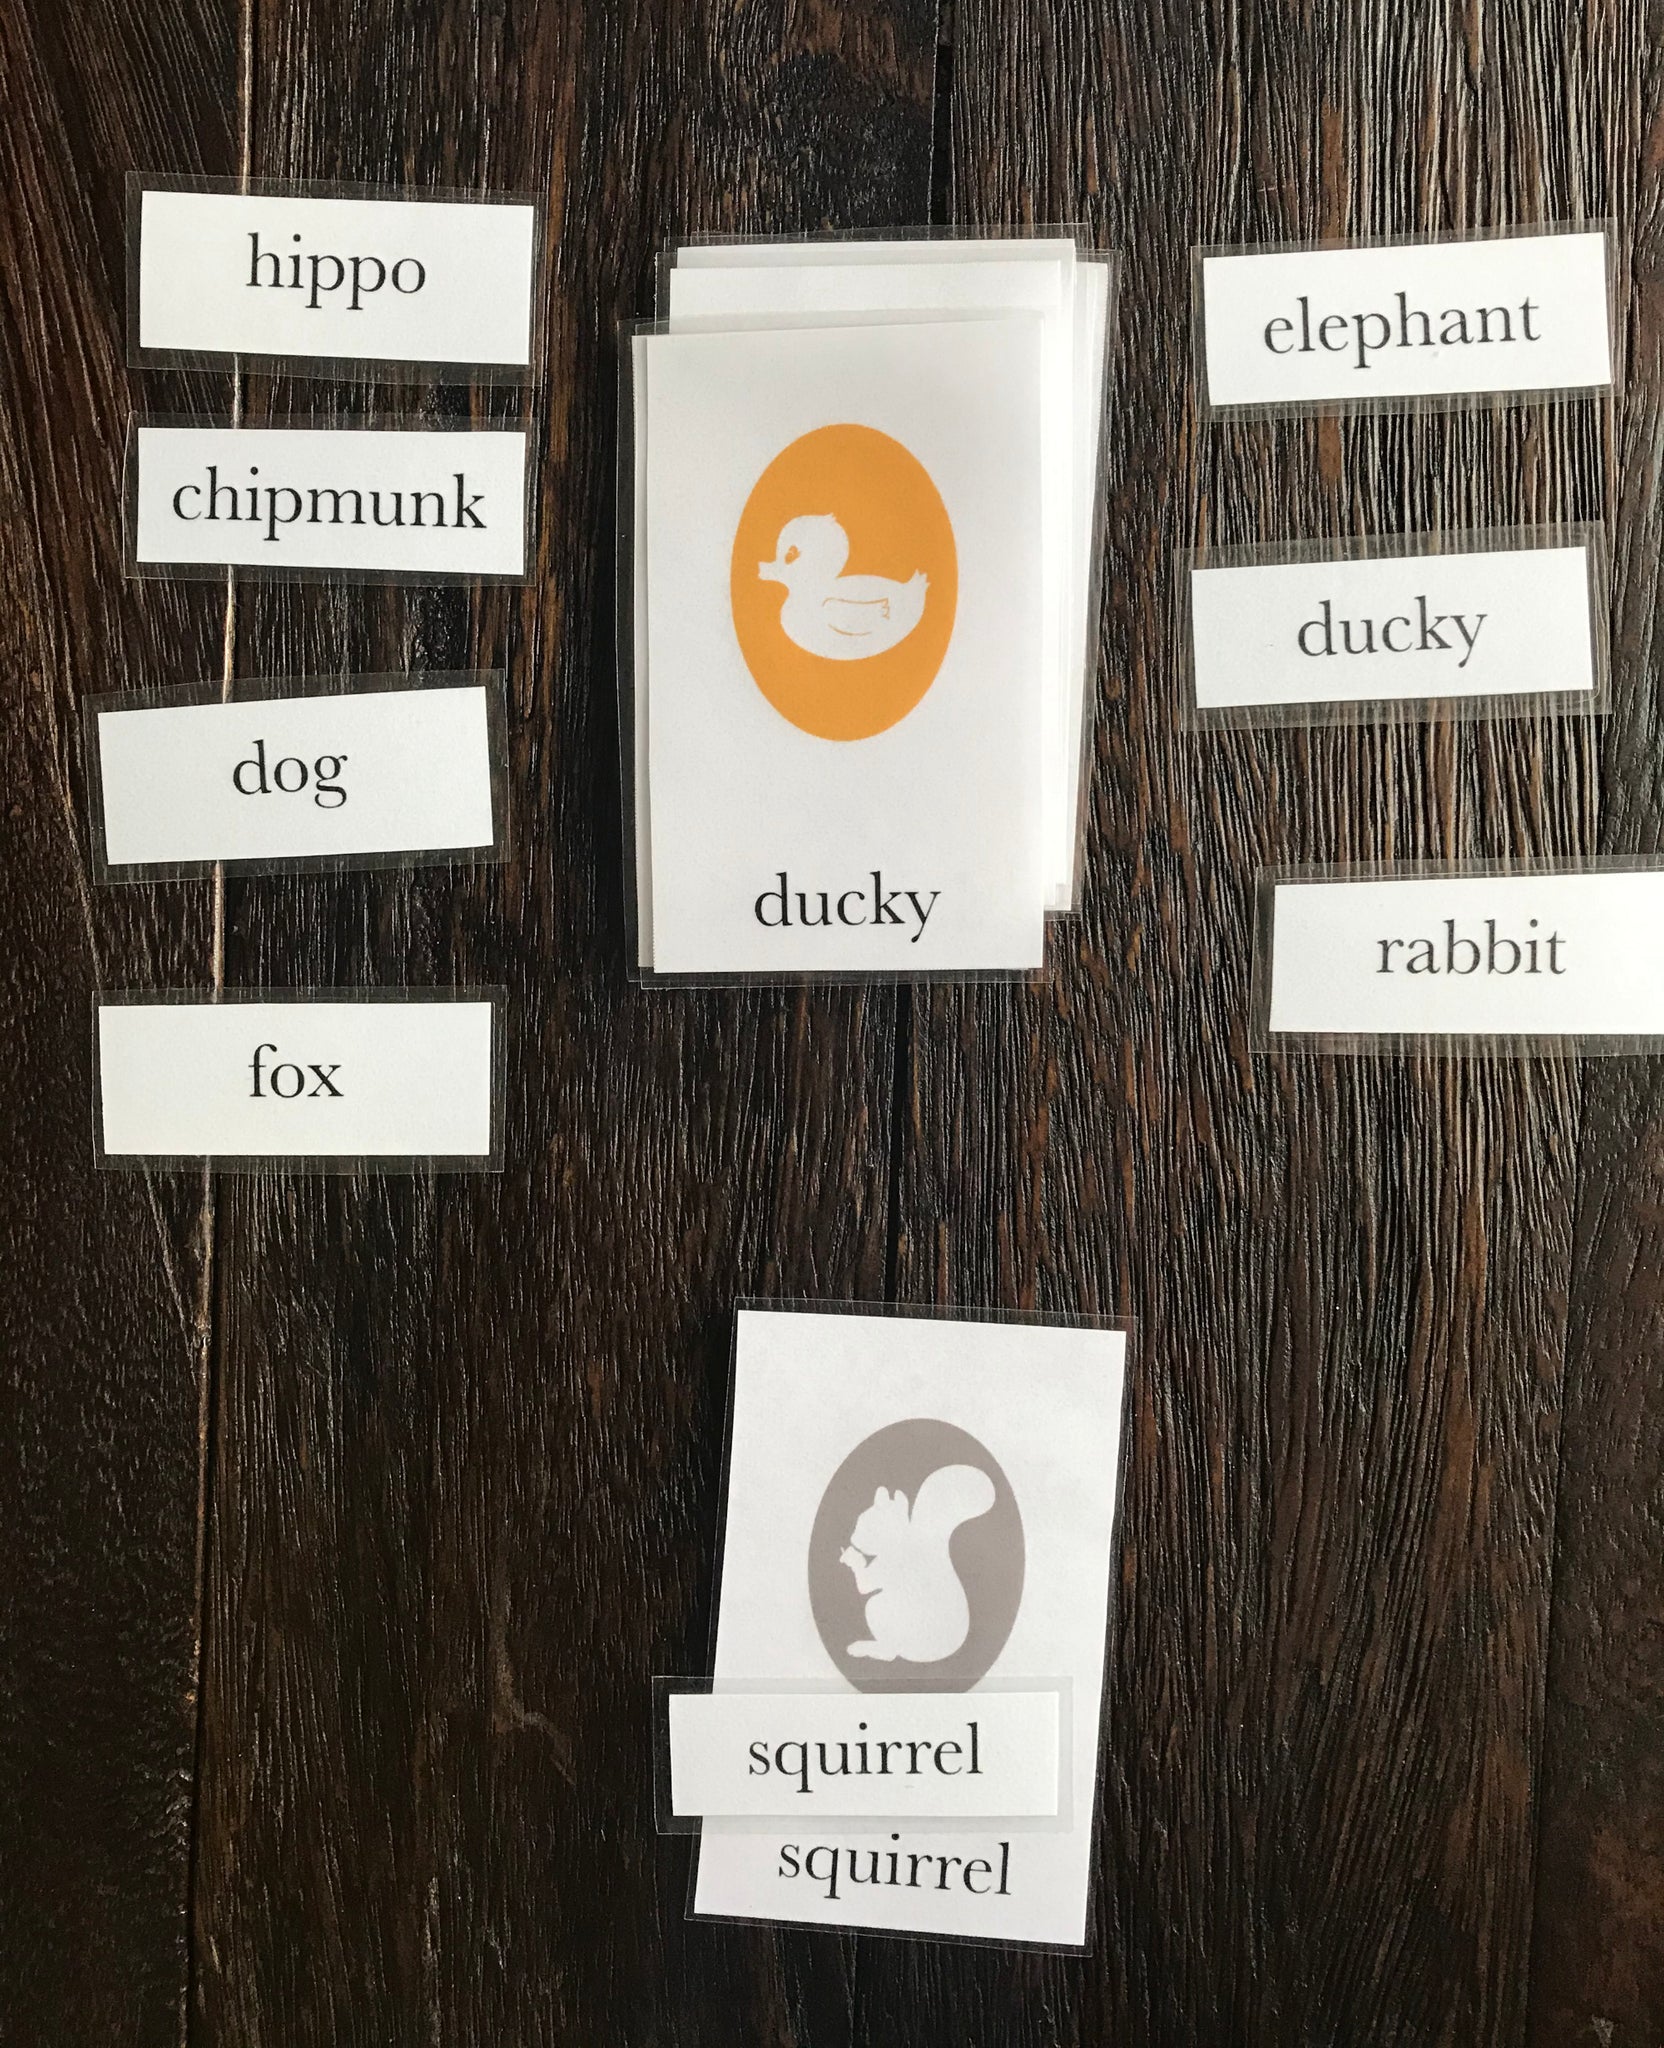 yellow ducky and squirrel flashcard word matching game